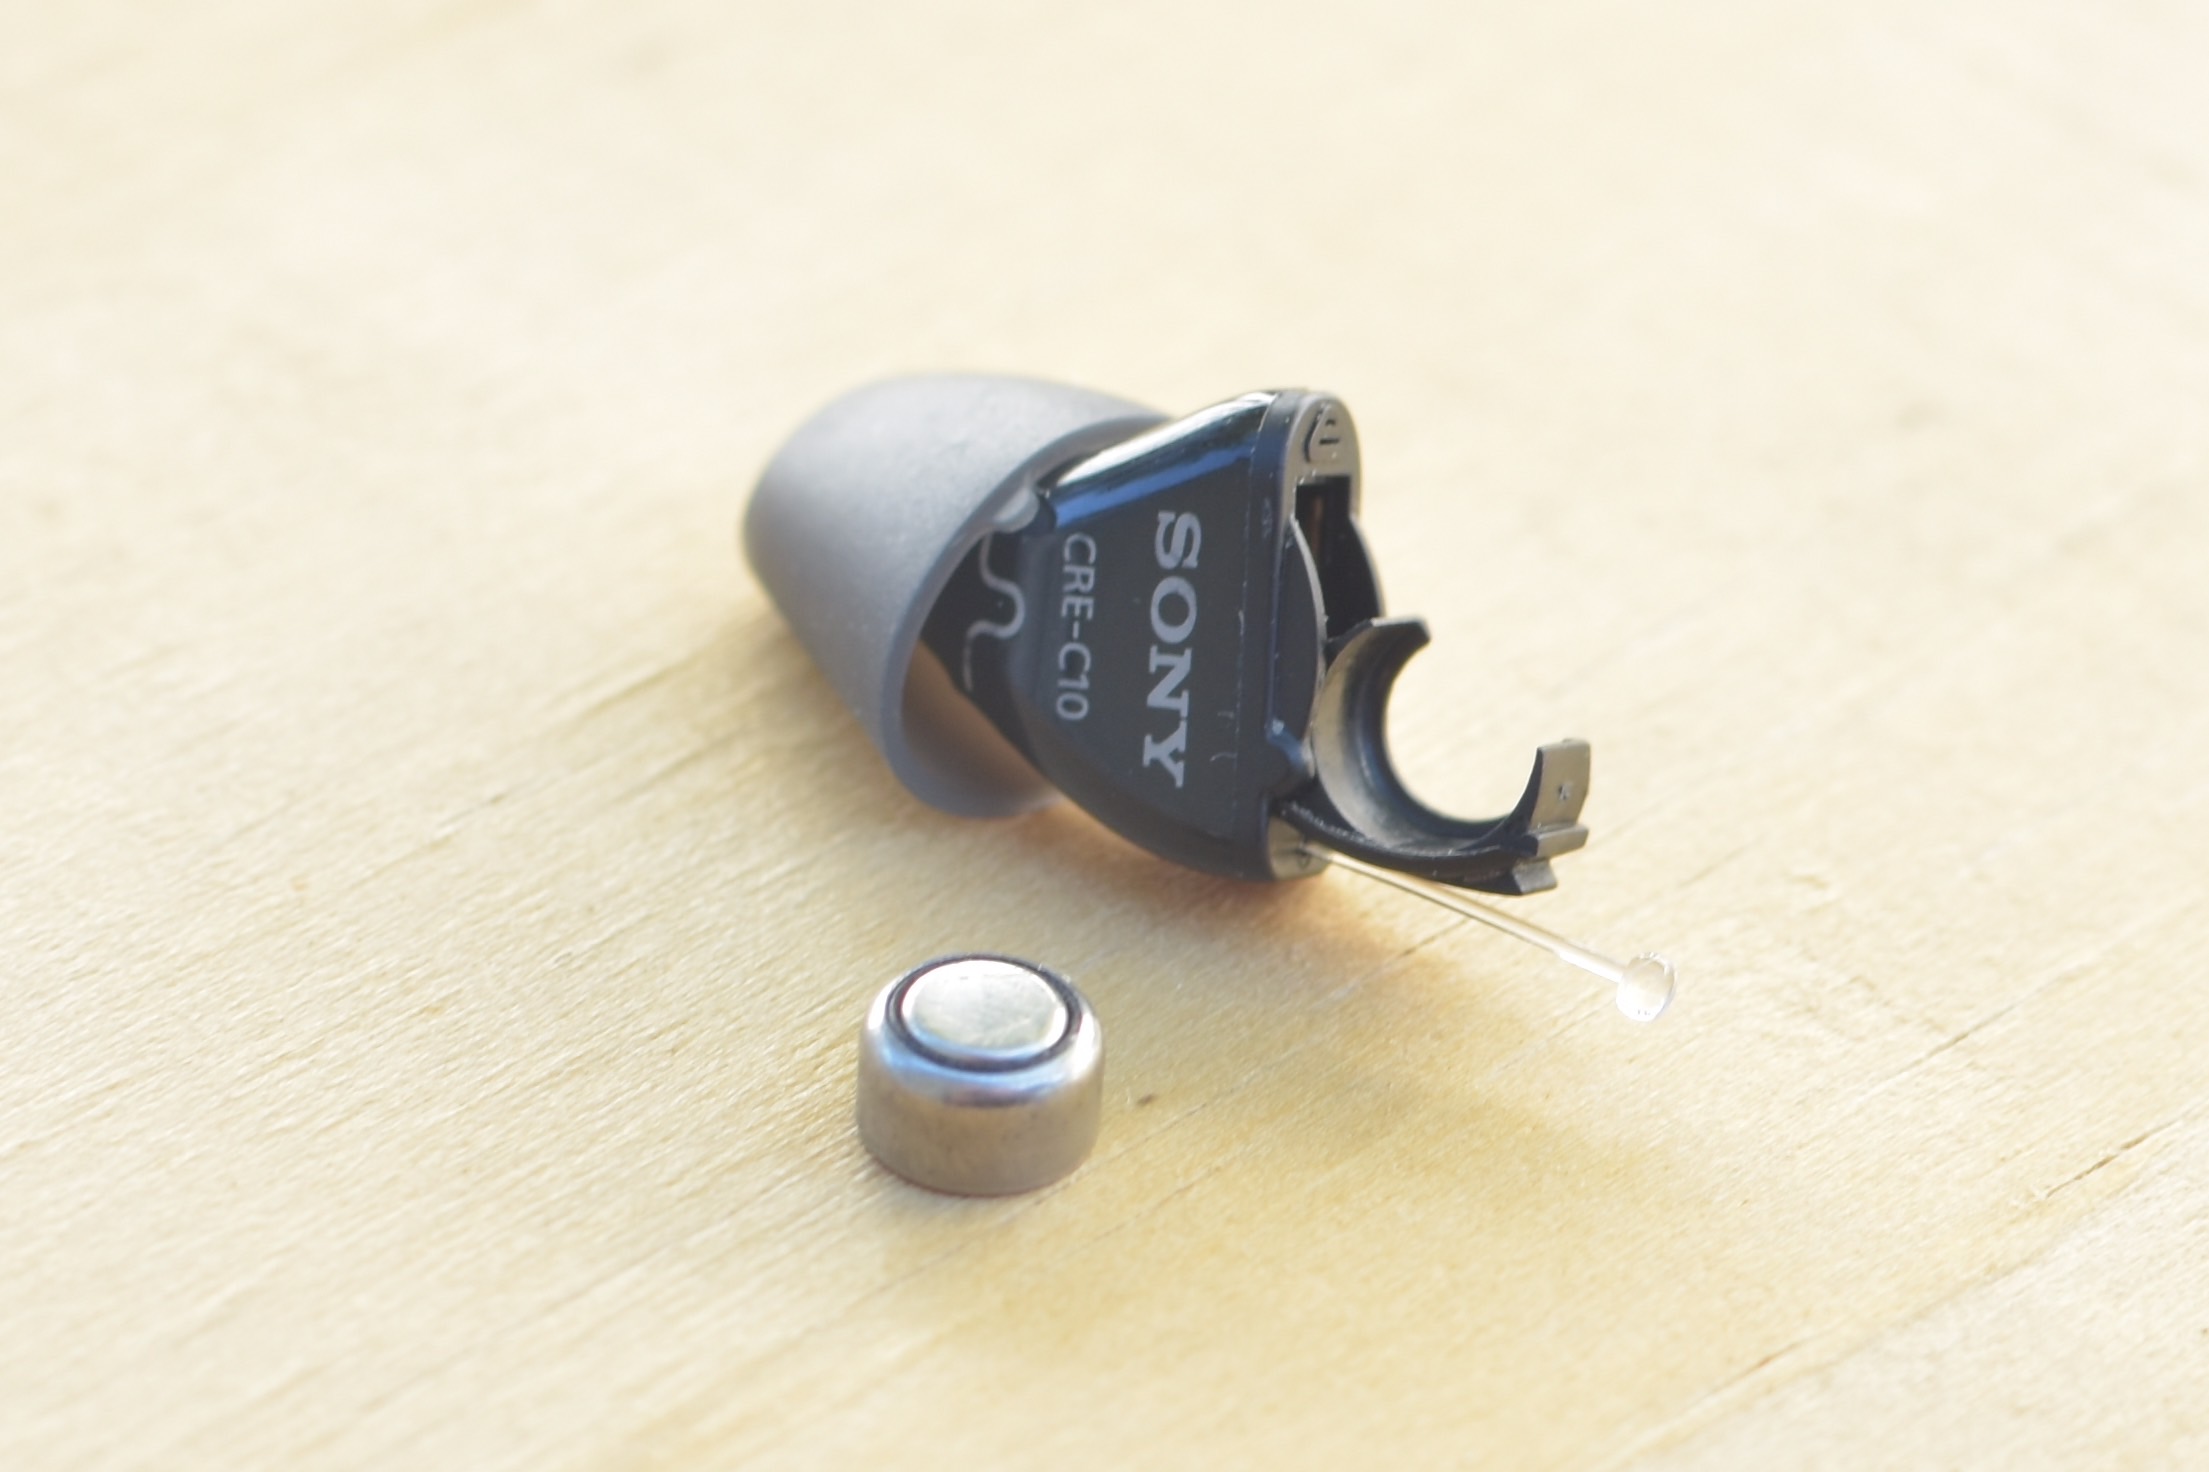 Sony CRE-C10 OTC hearing aid with battery removed.